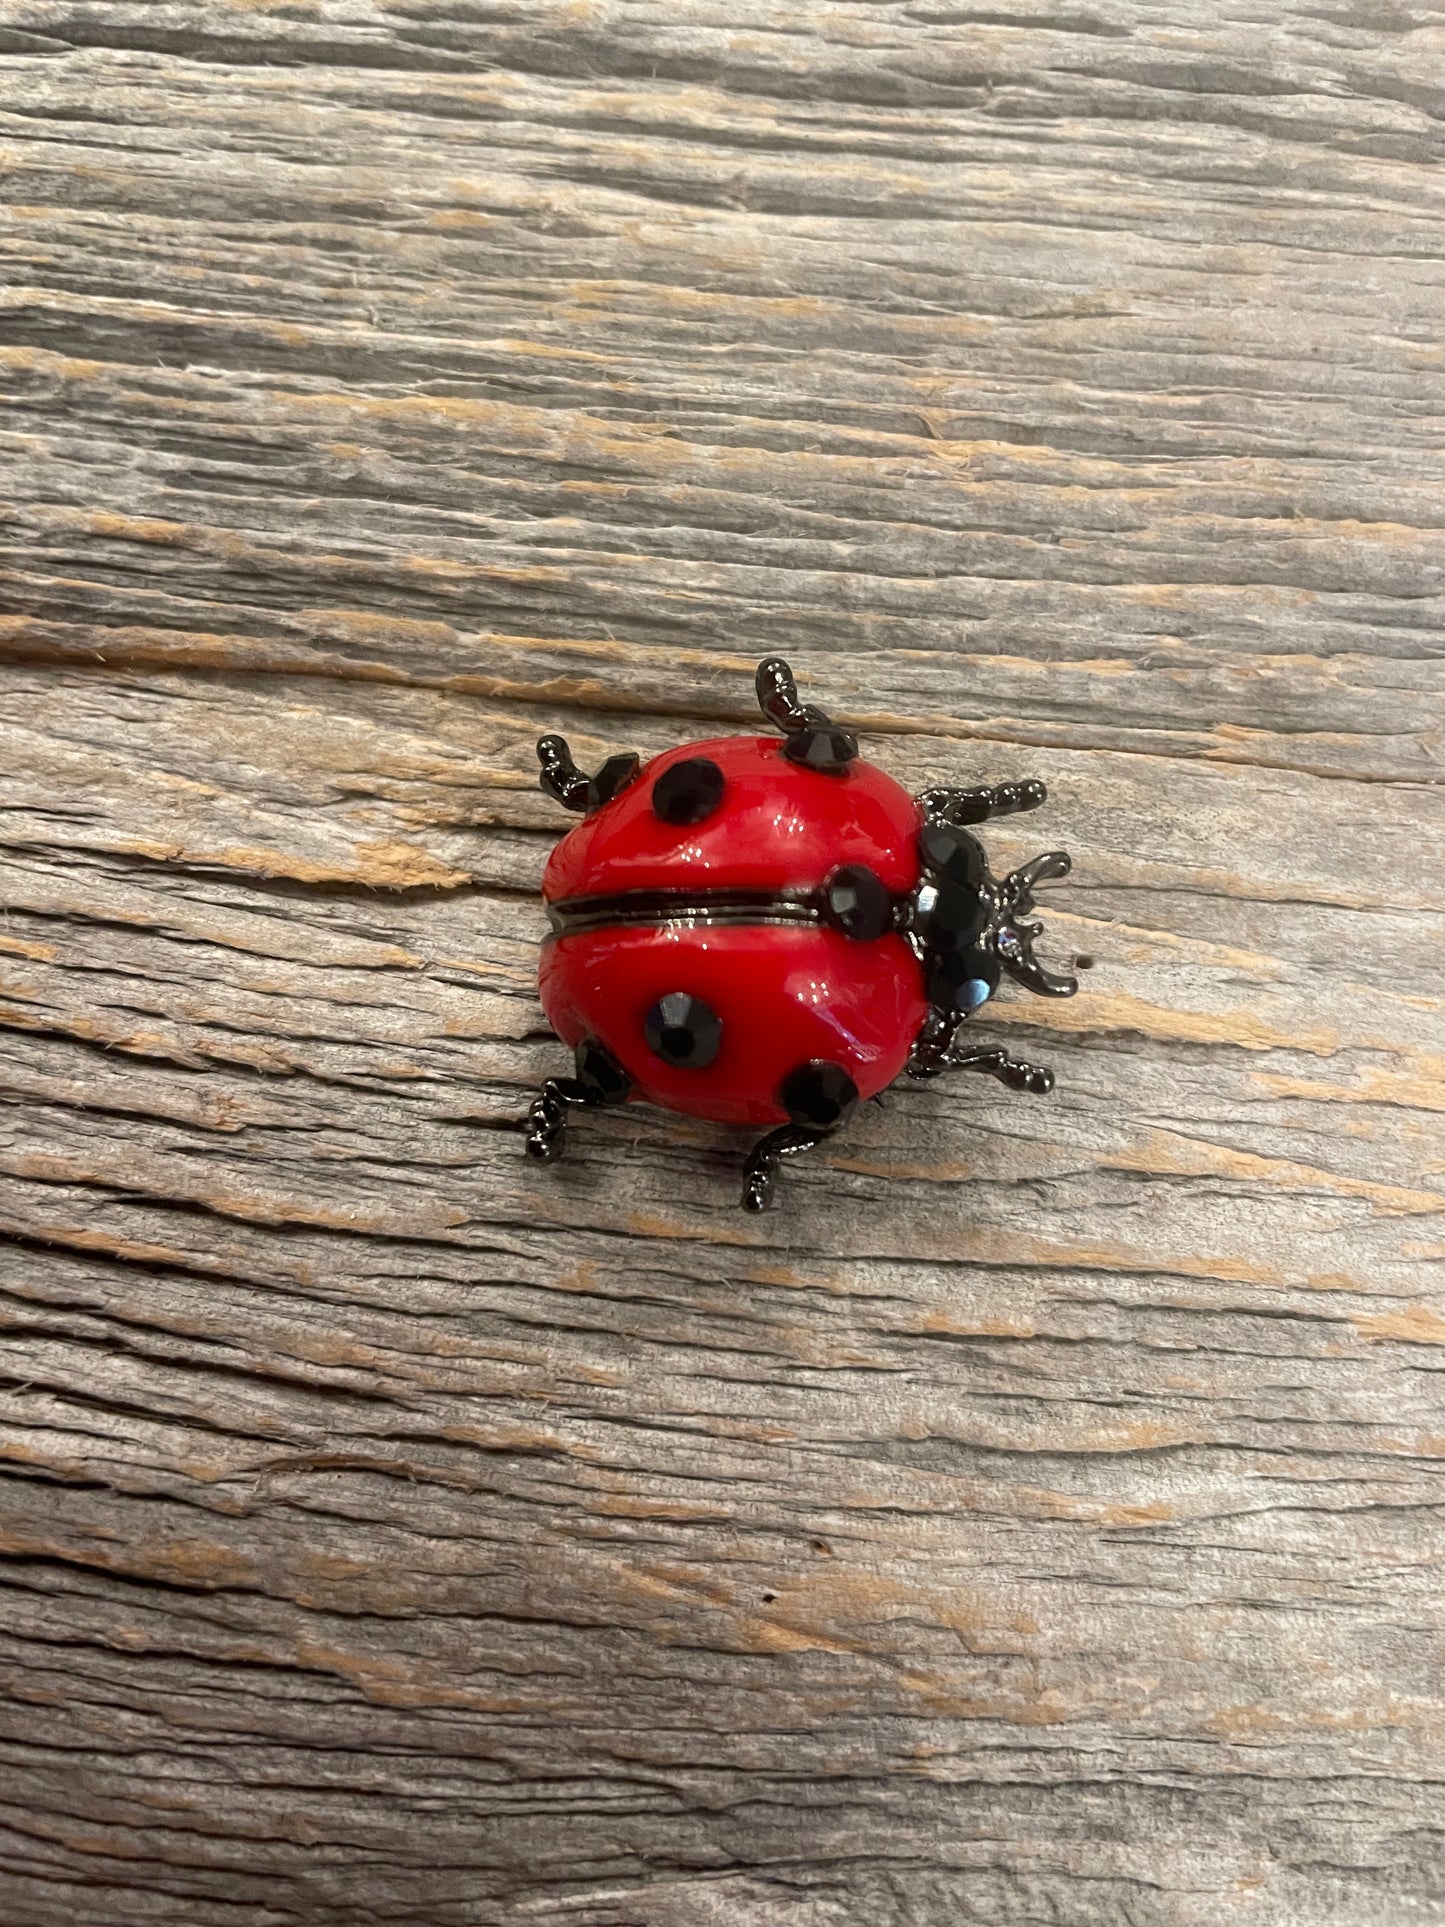 Red and Black ladybug brooch pin